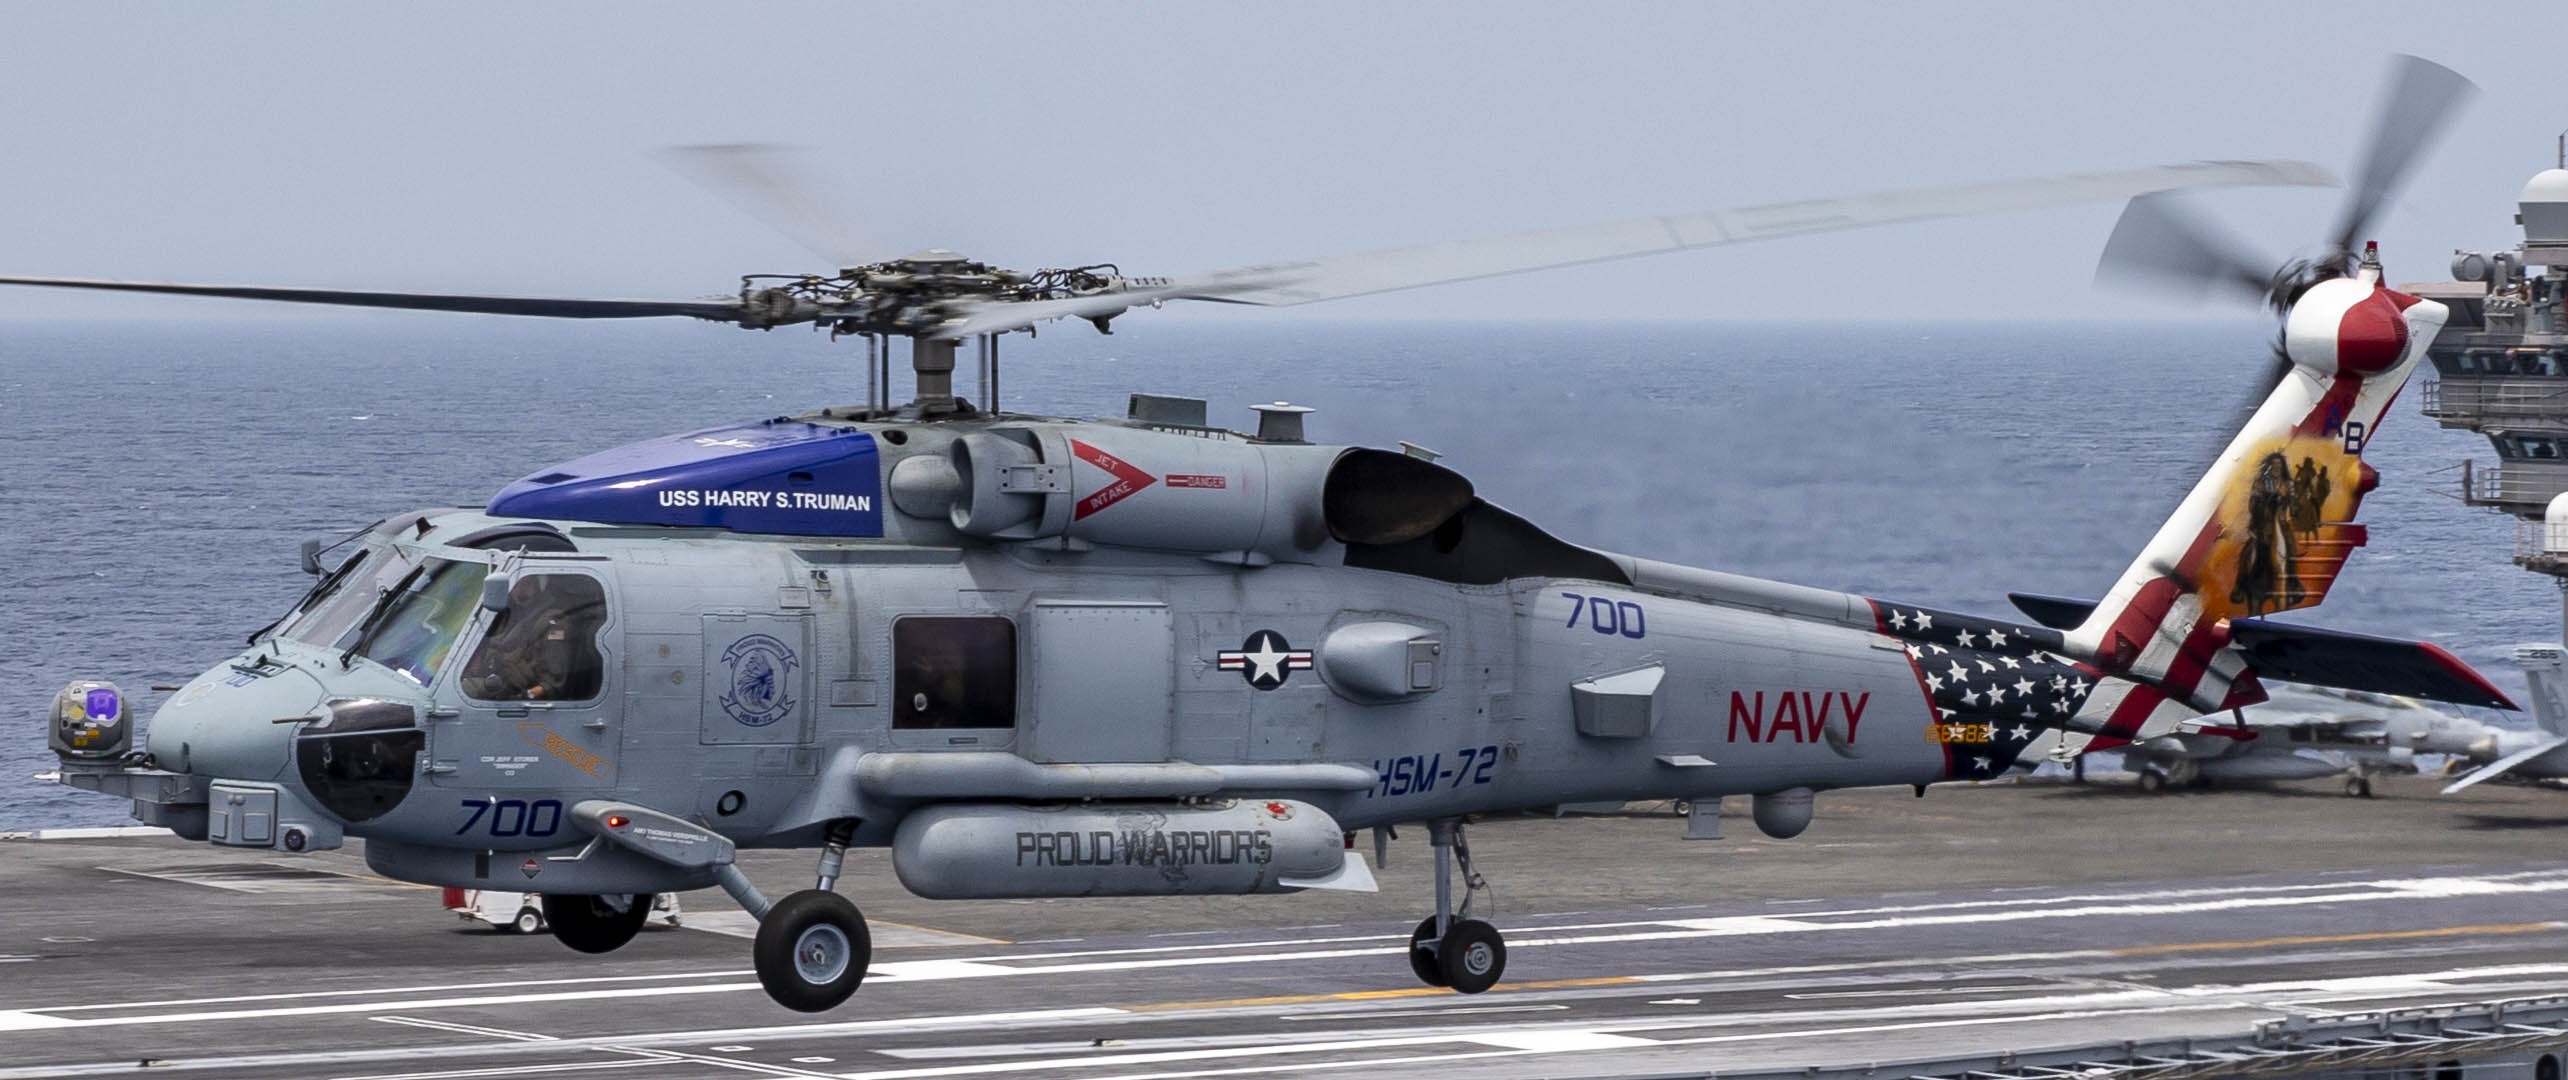 hsm-72 proud warriors helicopter maritime strike squadron us navy mh-60r seahawk 75